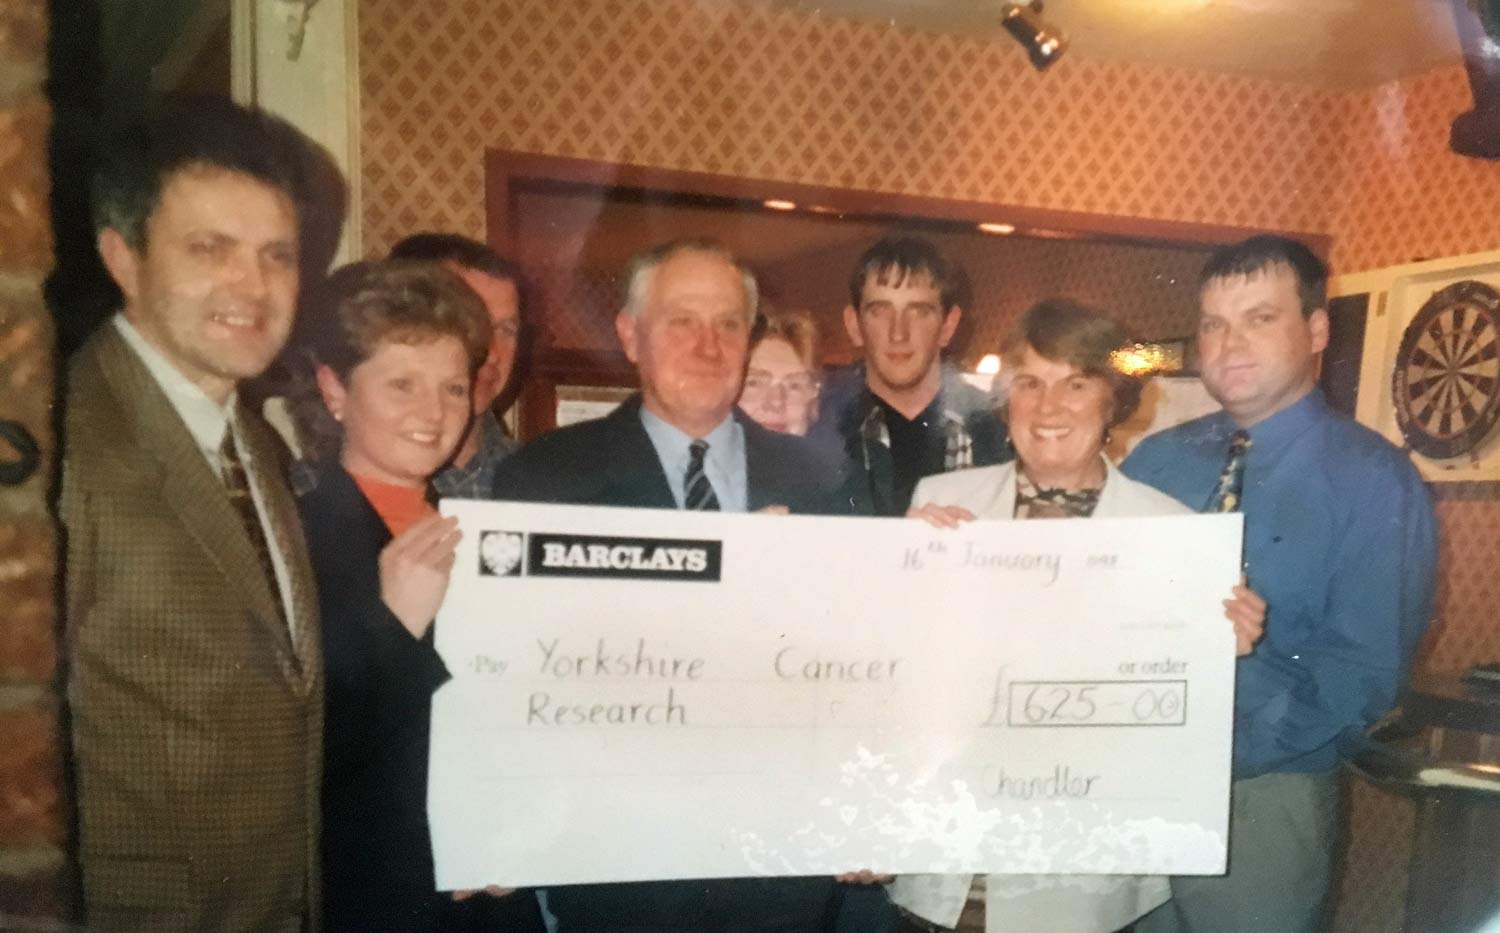 Michelle, second from left, and her father, centre, present a cheque to Jenny Moss, second from right, following Michelle’s first party in 1998